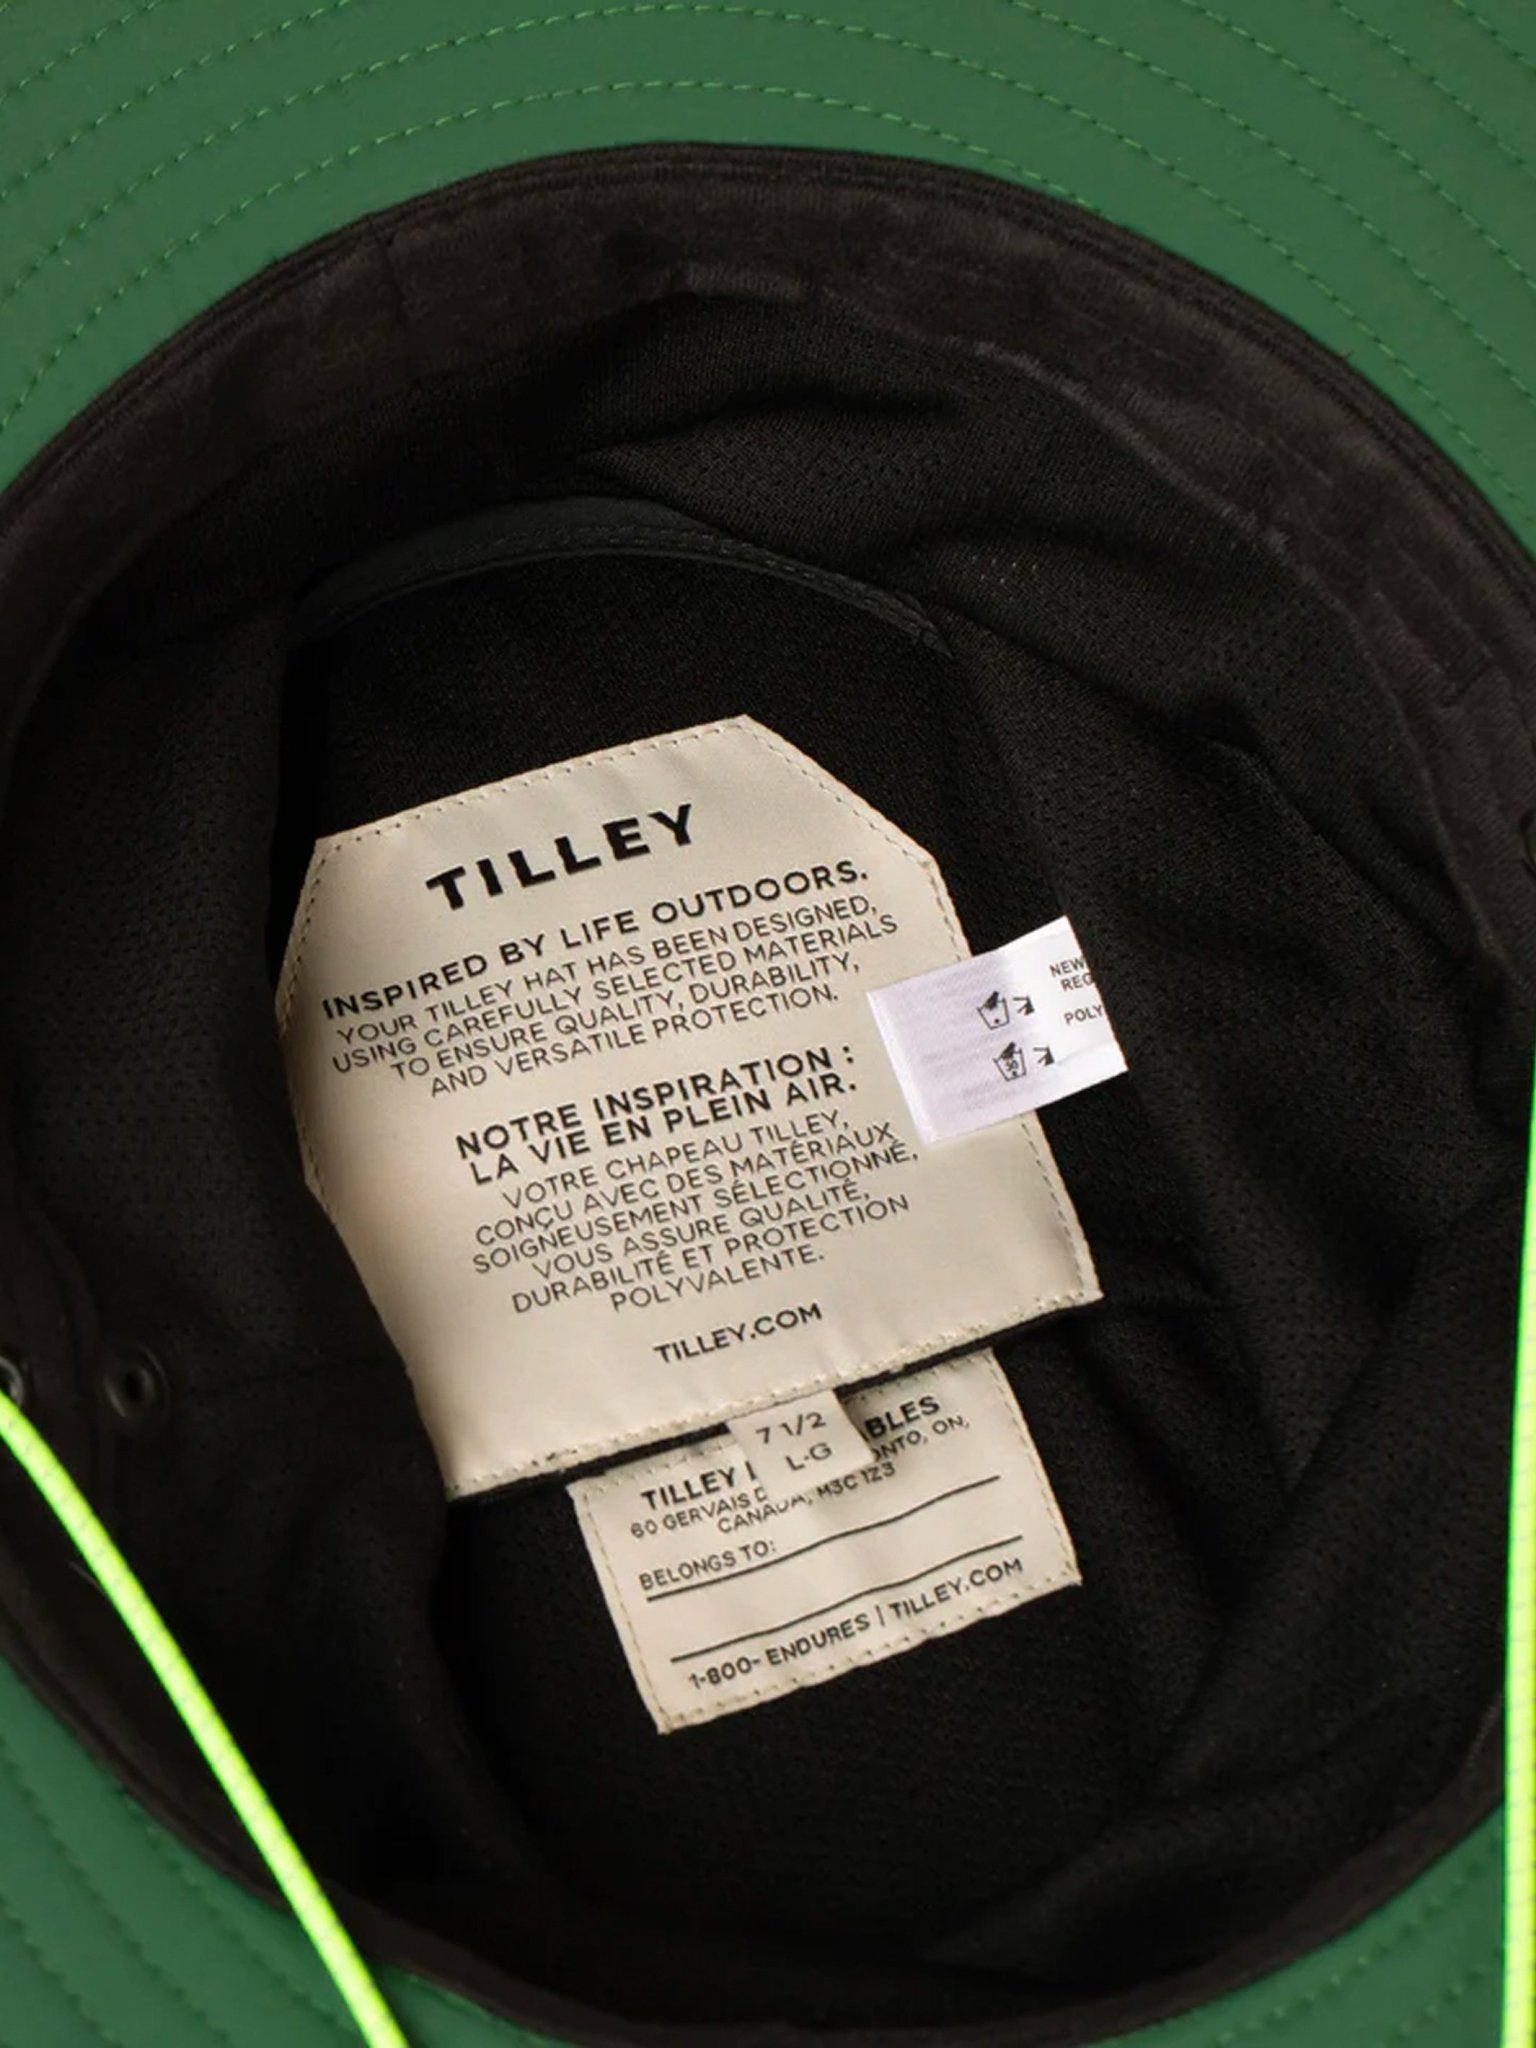 4elementsclothingTilleyTilley - TWS1 All Weather Hat - Water Repellent DWR Coated - Rated UPF 50+ and BuoyantHats826486440976